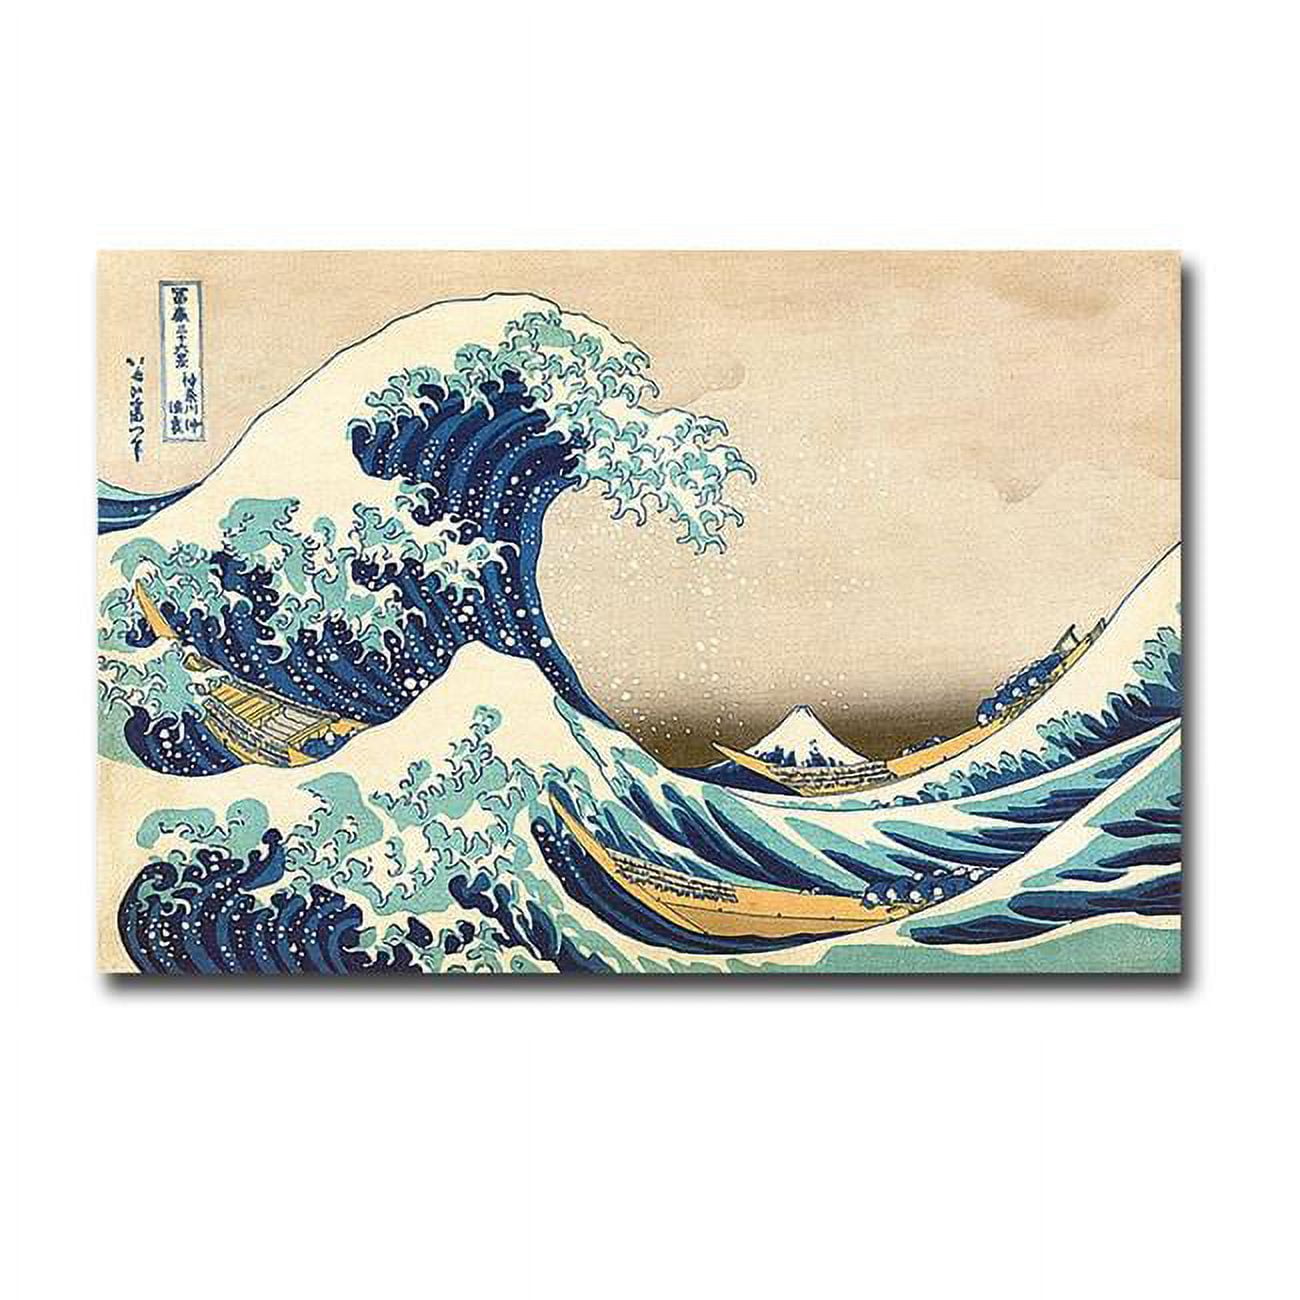 1218a578ig The Great Wave Off Kanagawa By Katsushika Hokusai Premium Gallery-wrapped Canvas Giclee - 12 X 18 X 1.5 In.